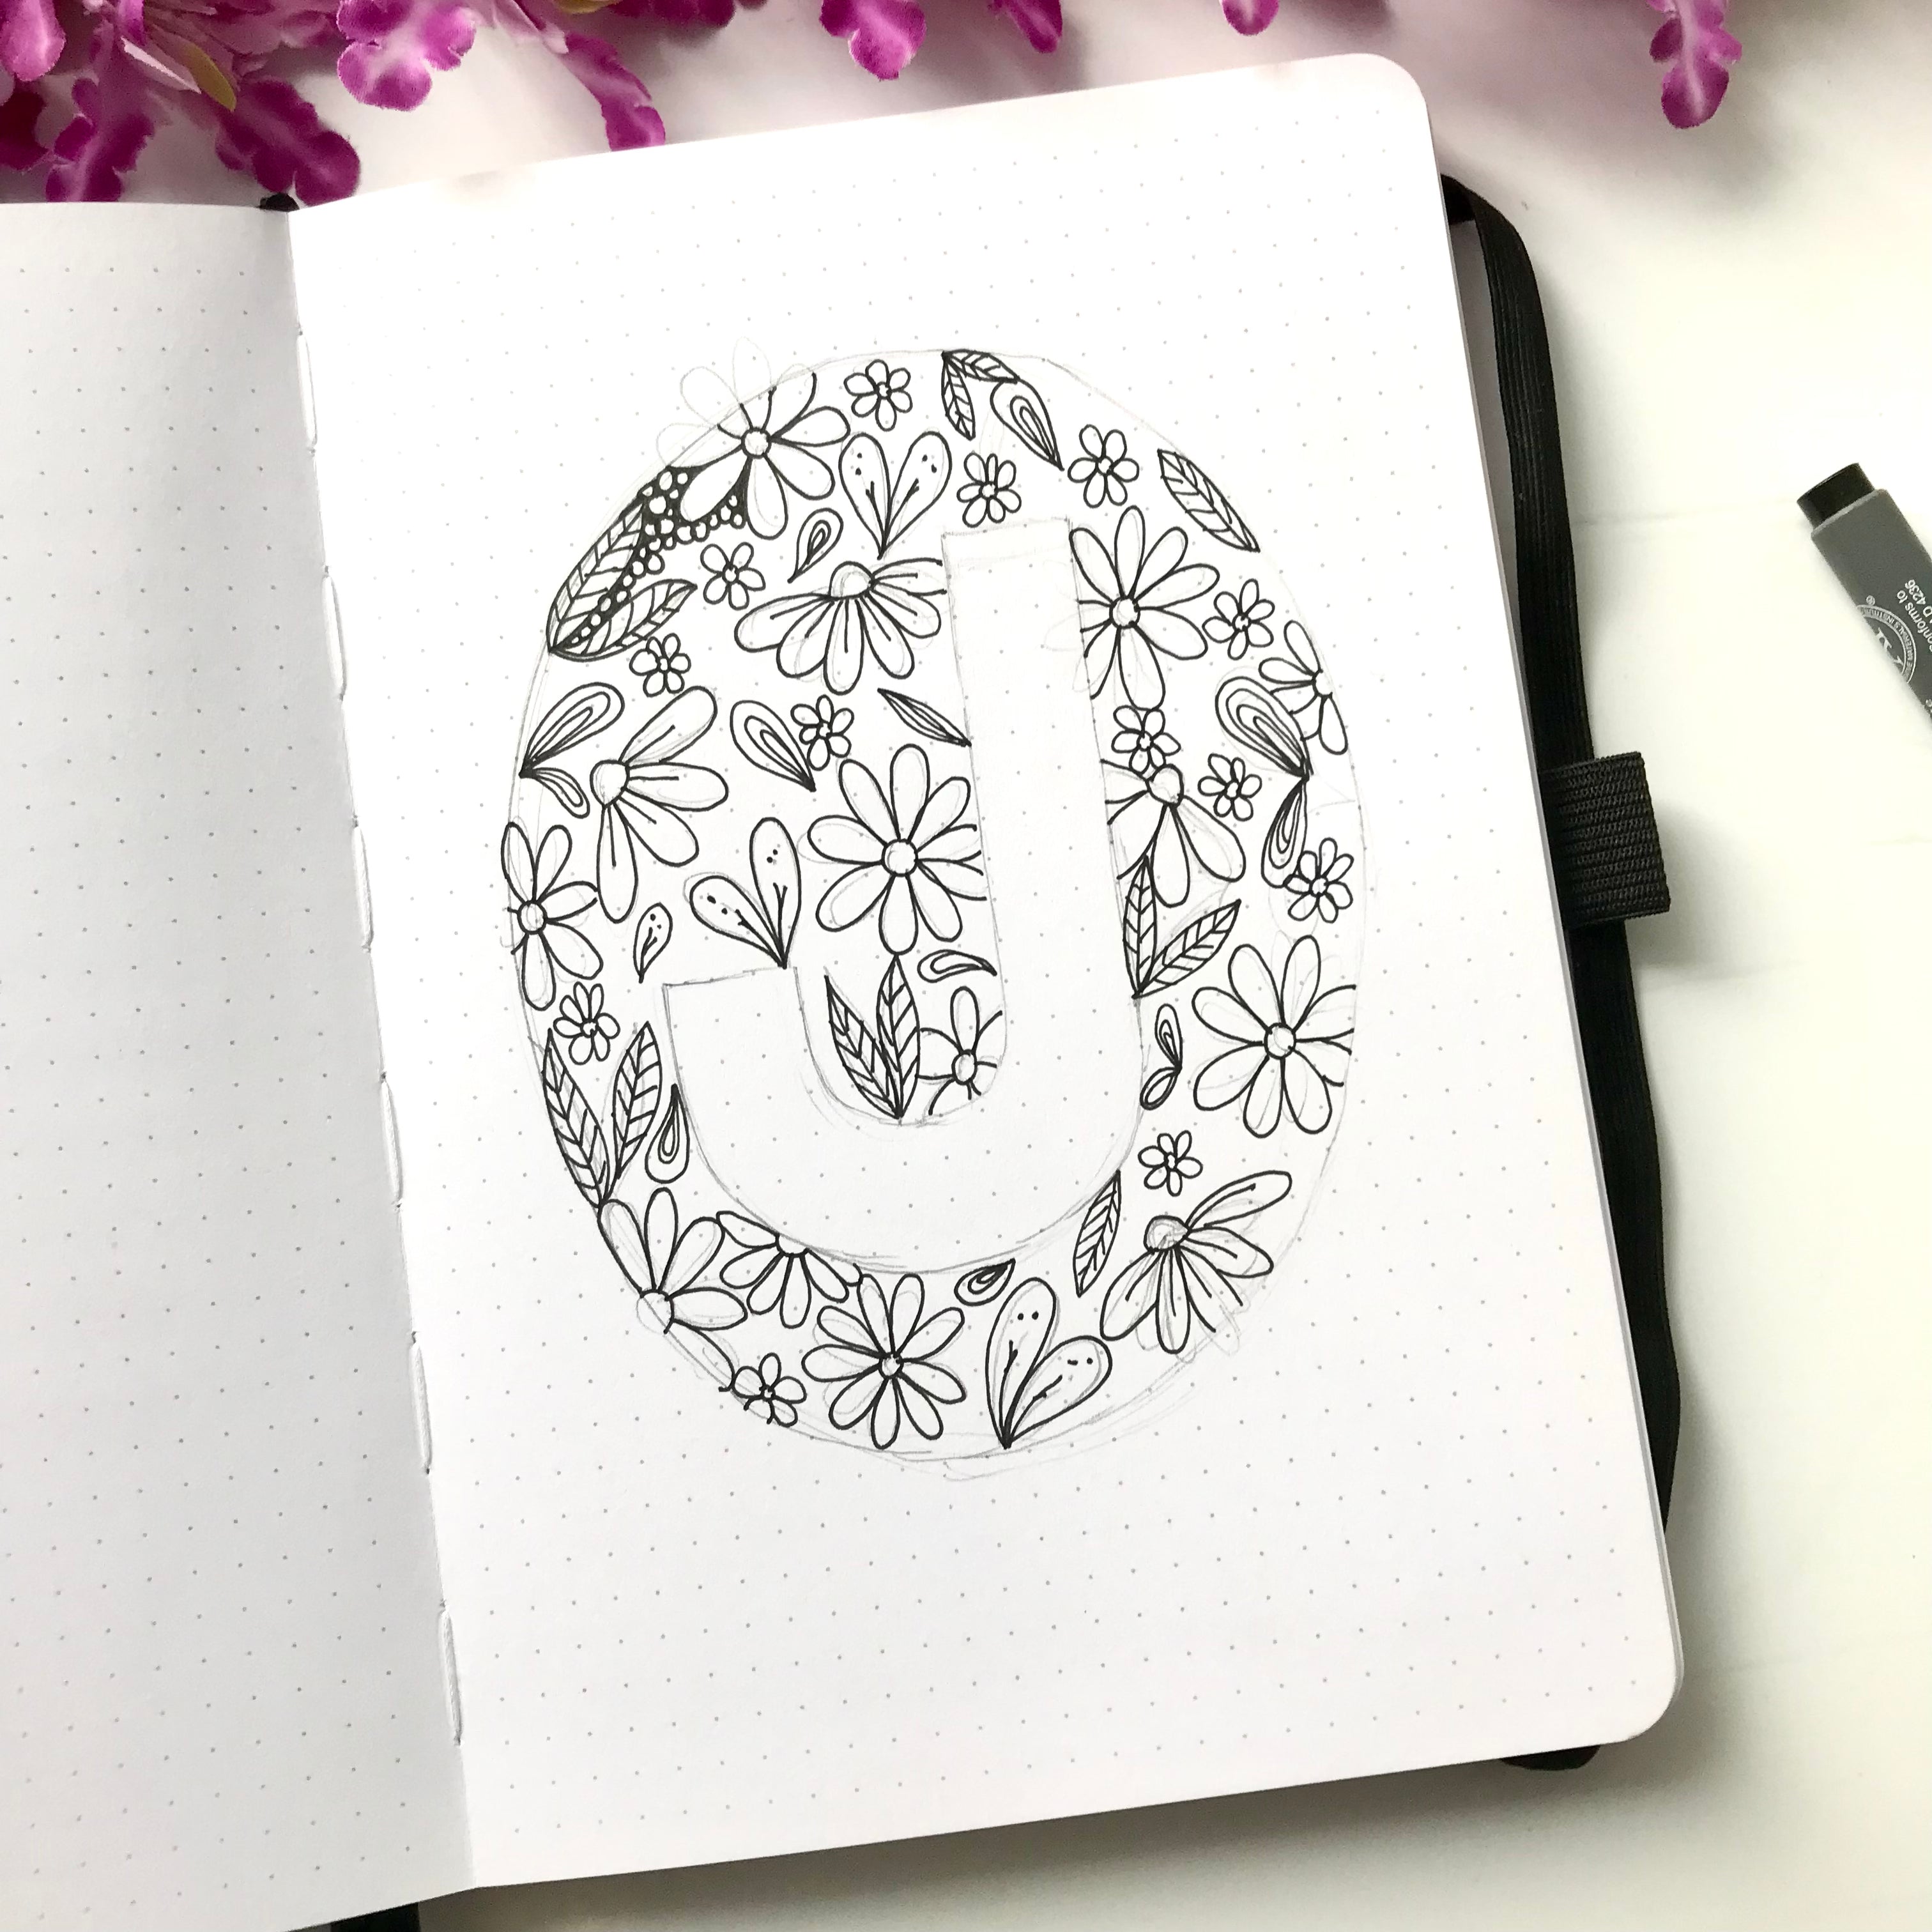 filling in florals design with pen